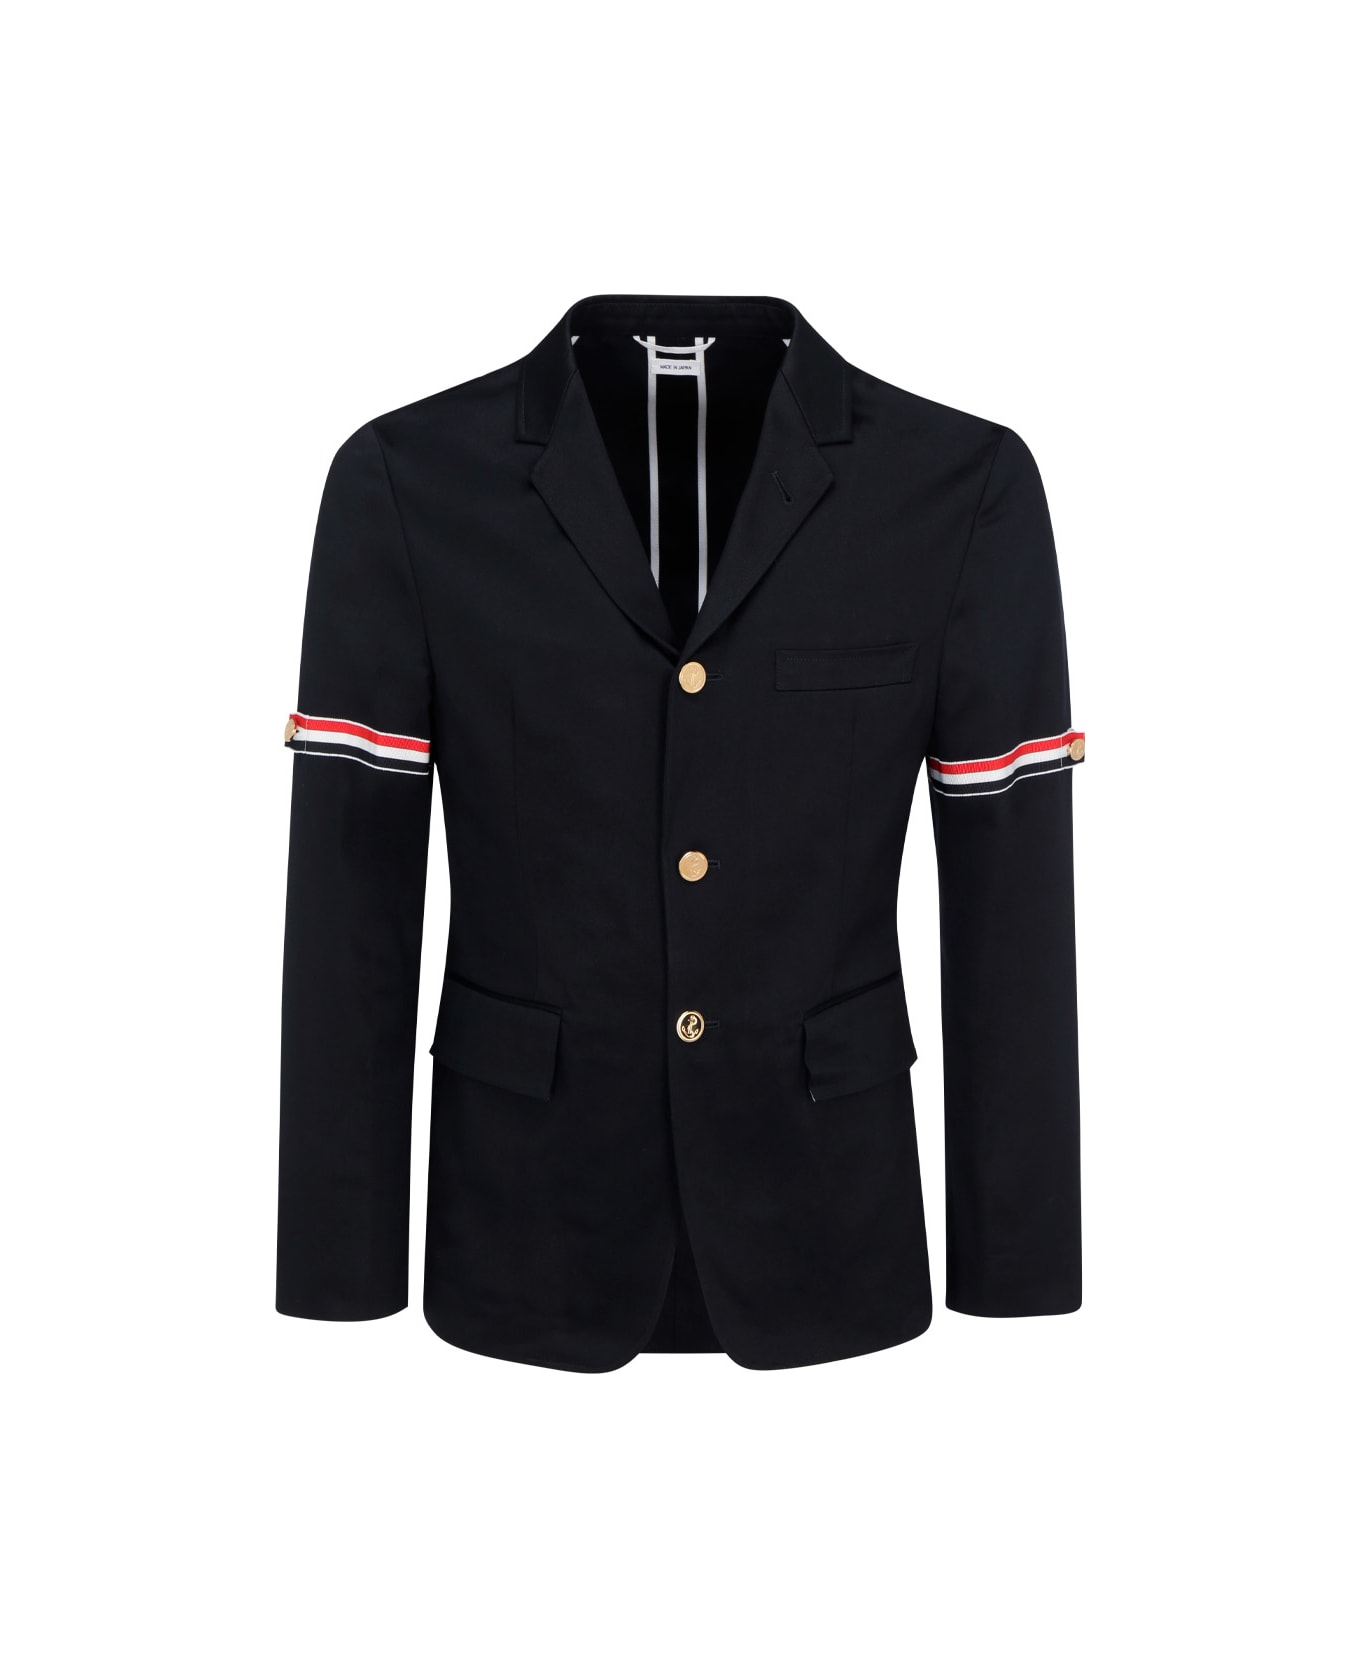 Thom Browne Unconstructed Jacket - Navy